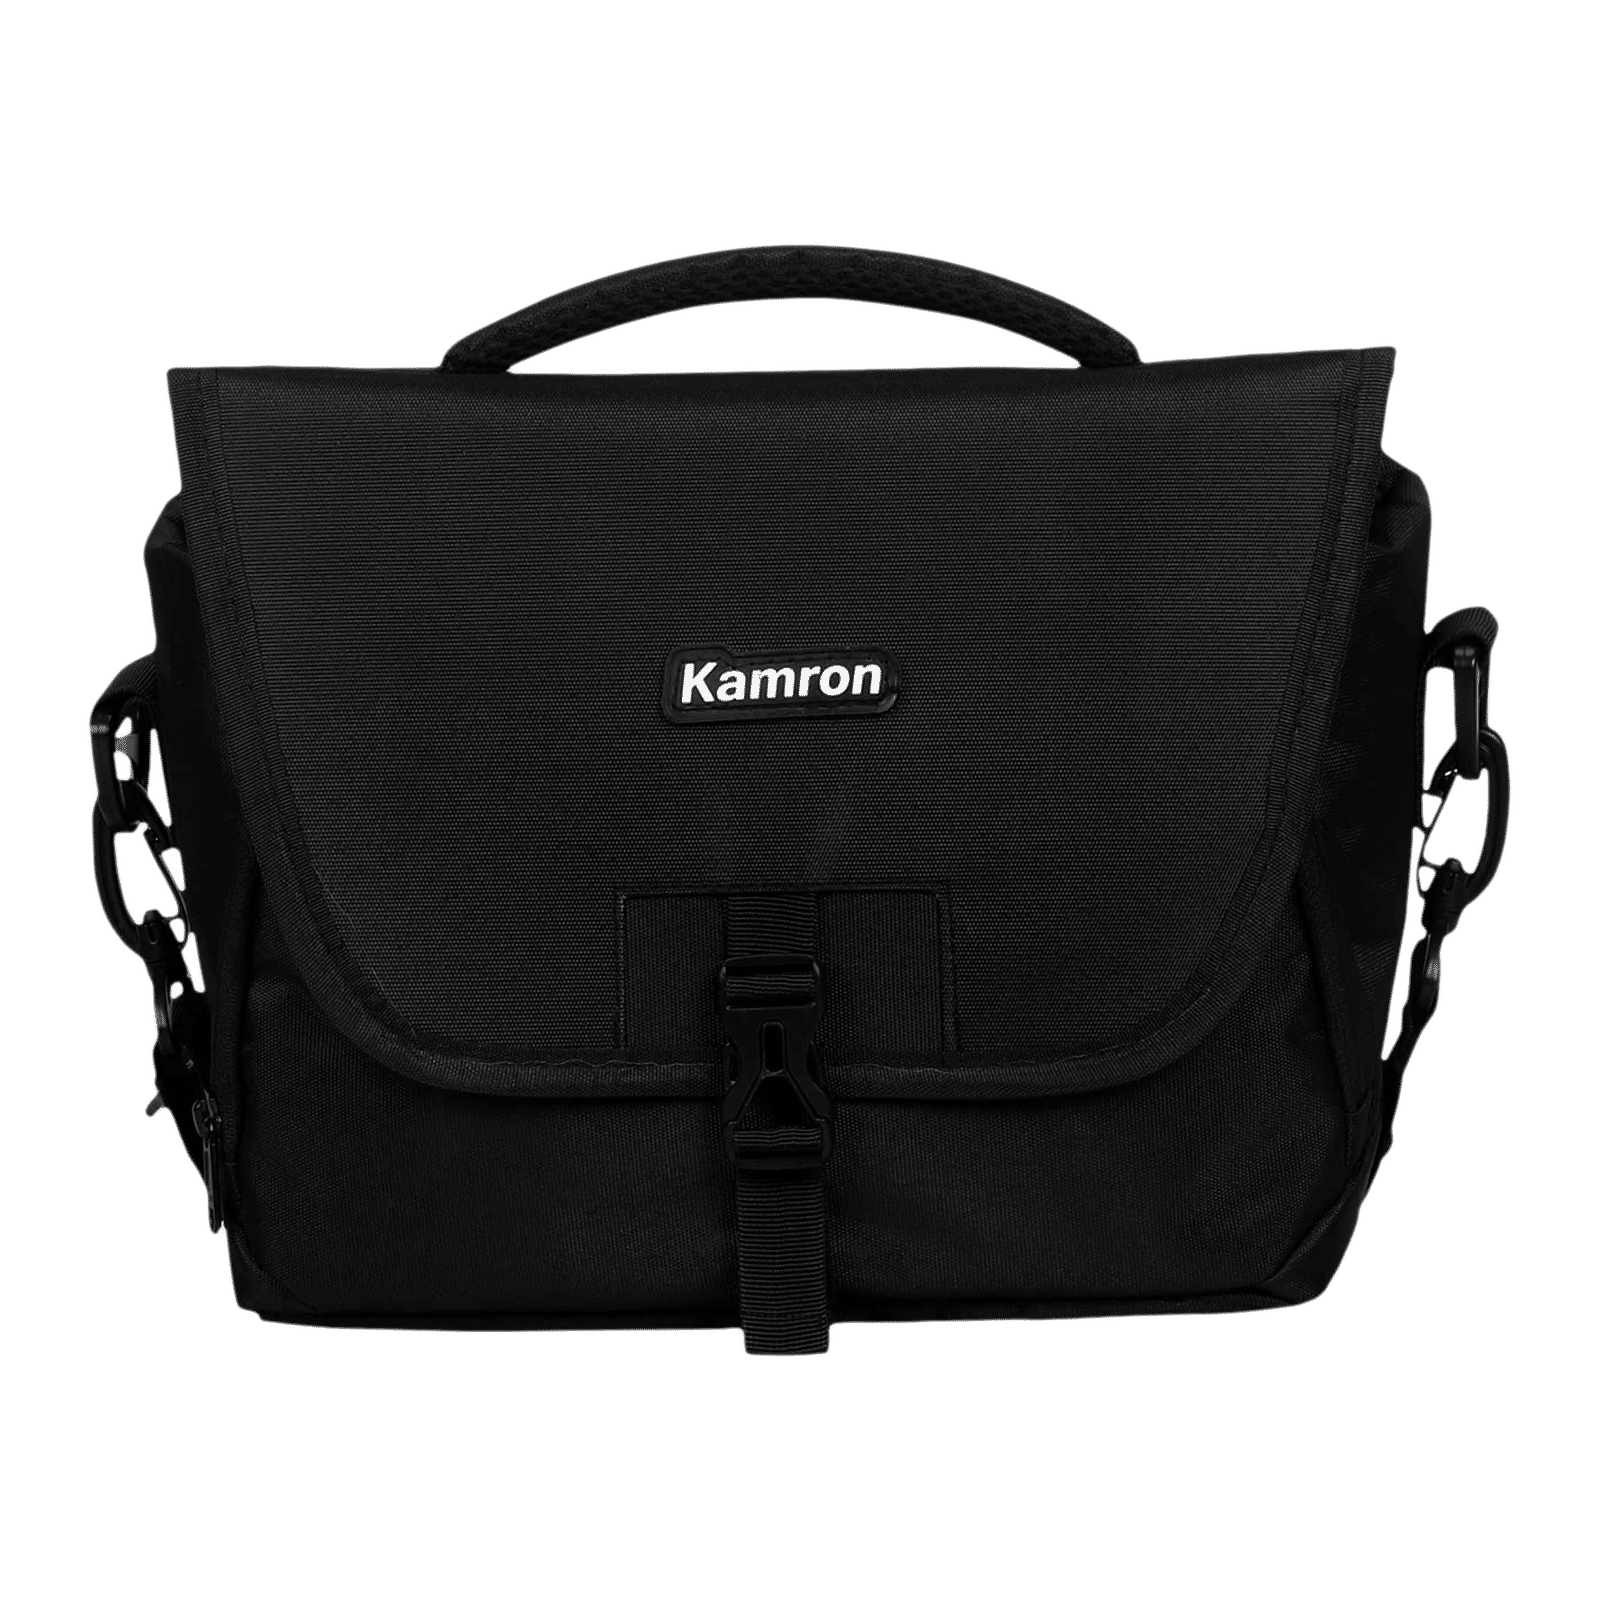 Inateck Camera Case Bag Review - ET Speaks From Home